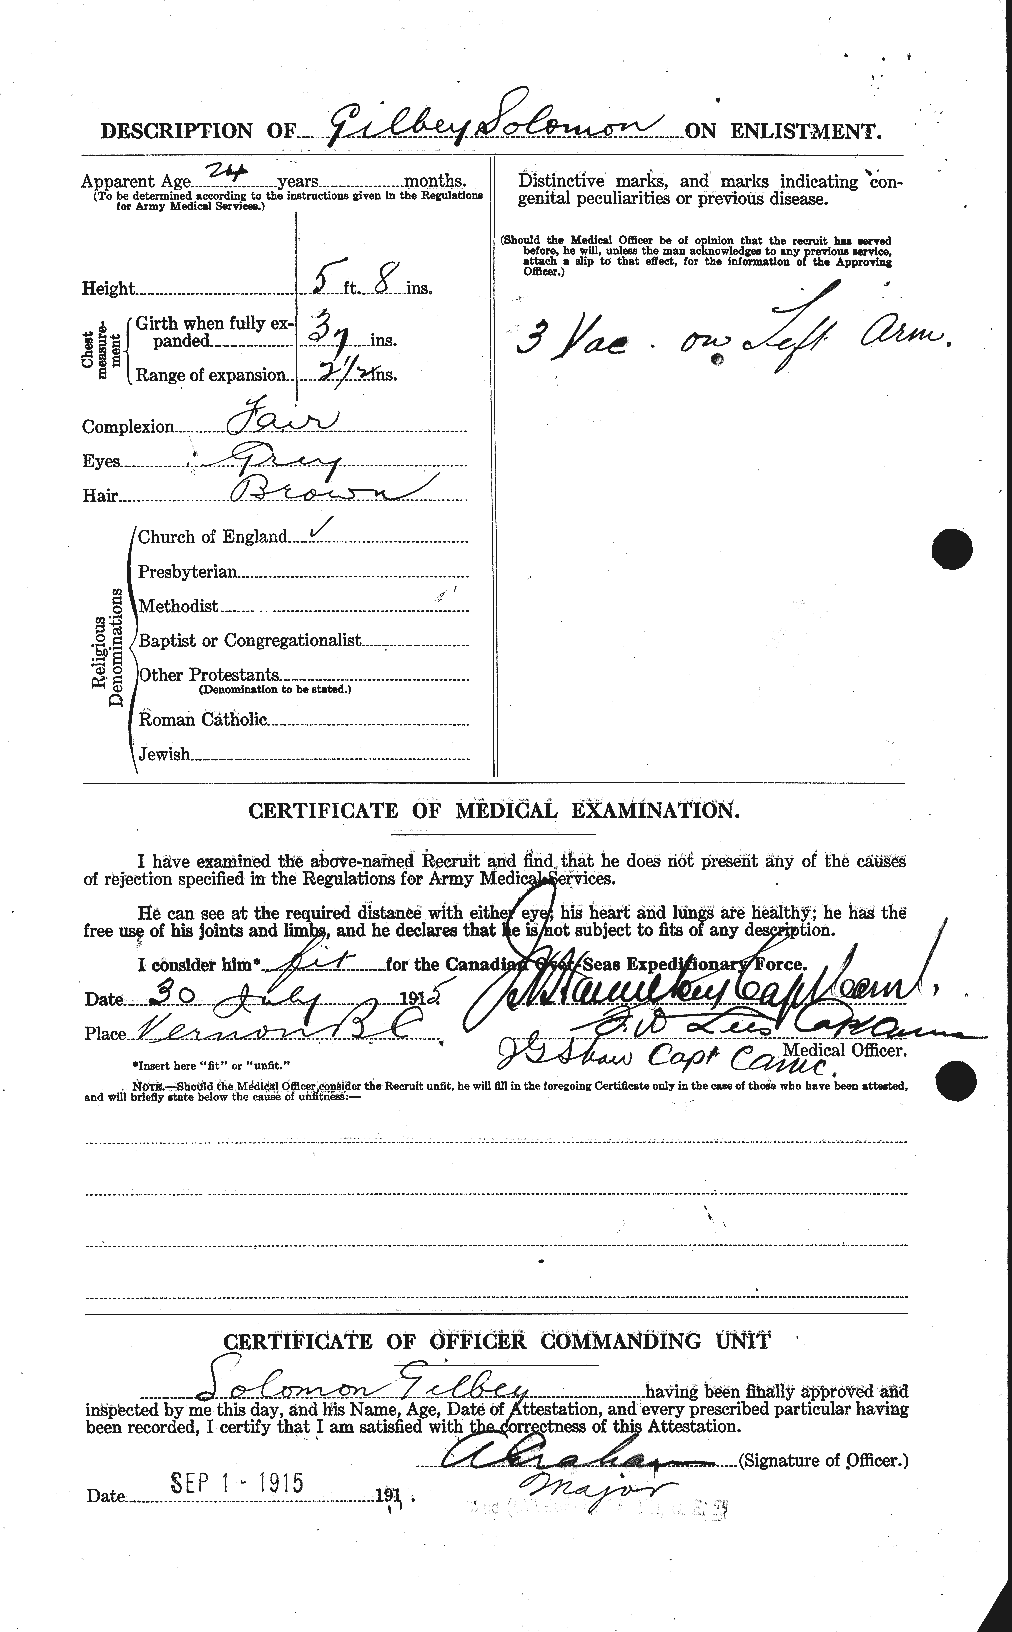 Personnel Records of the First World War - CEF 352582b